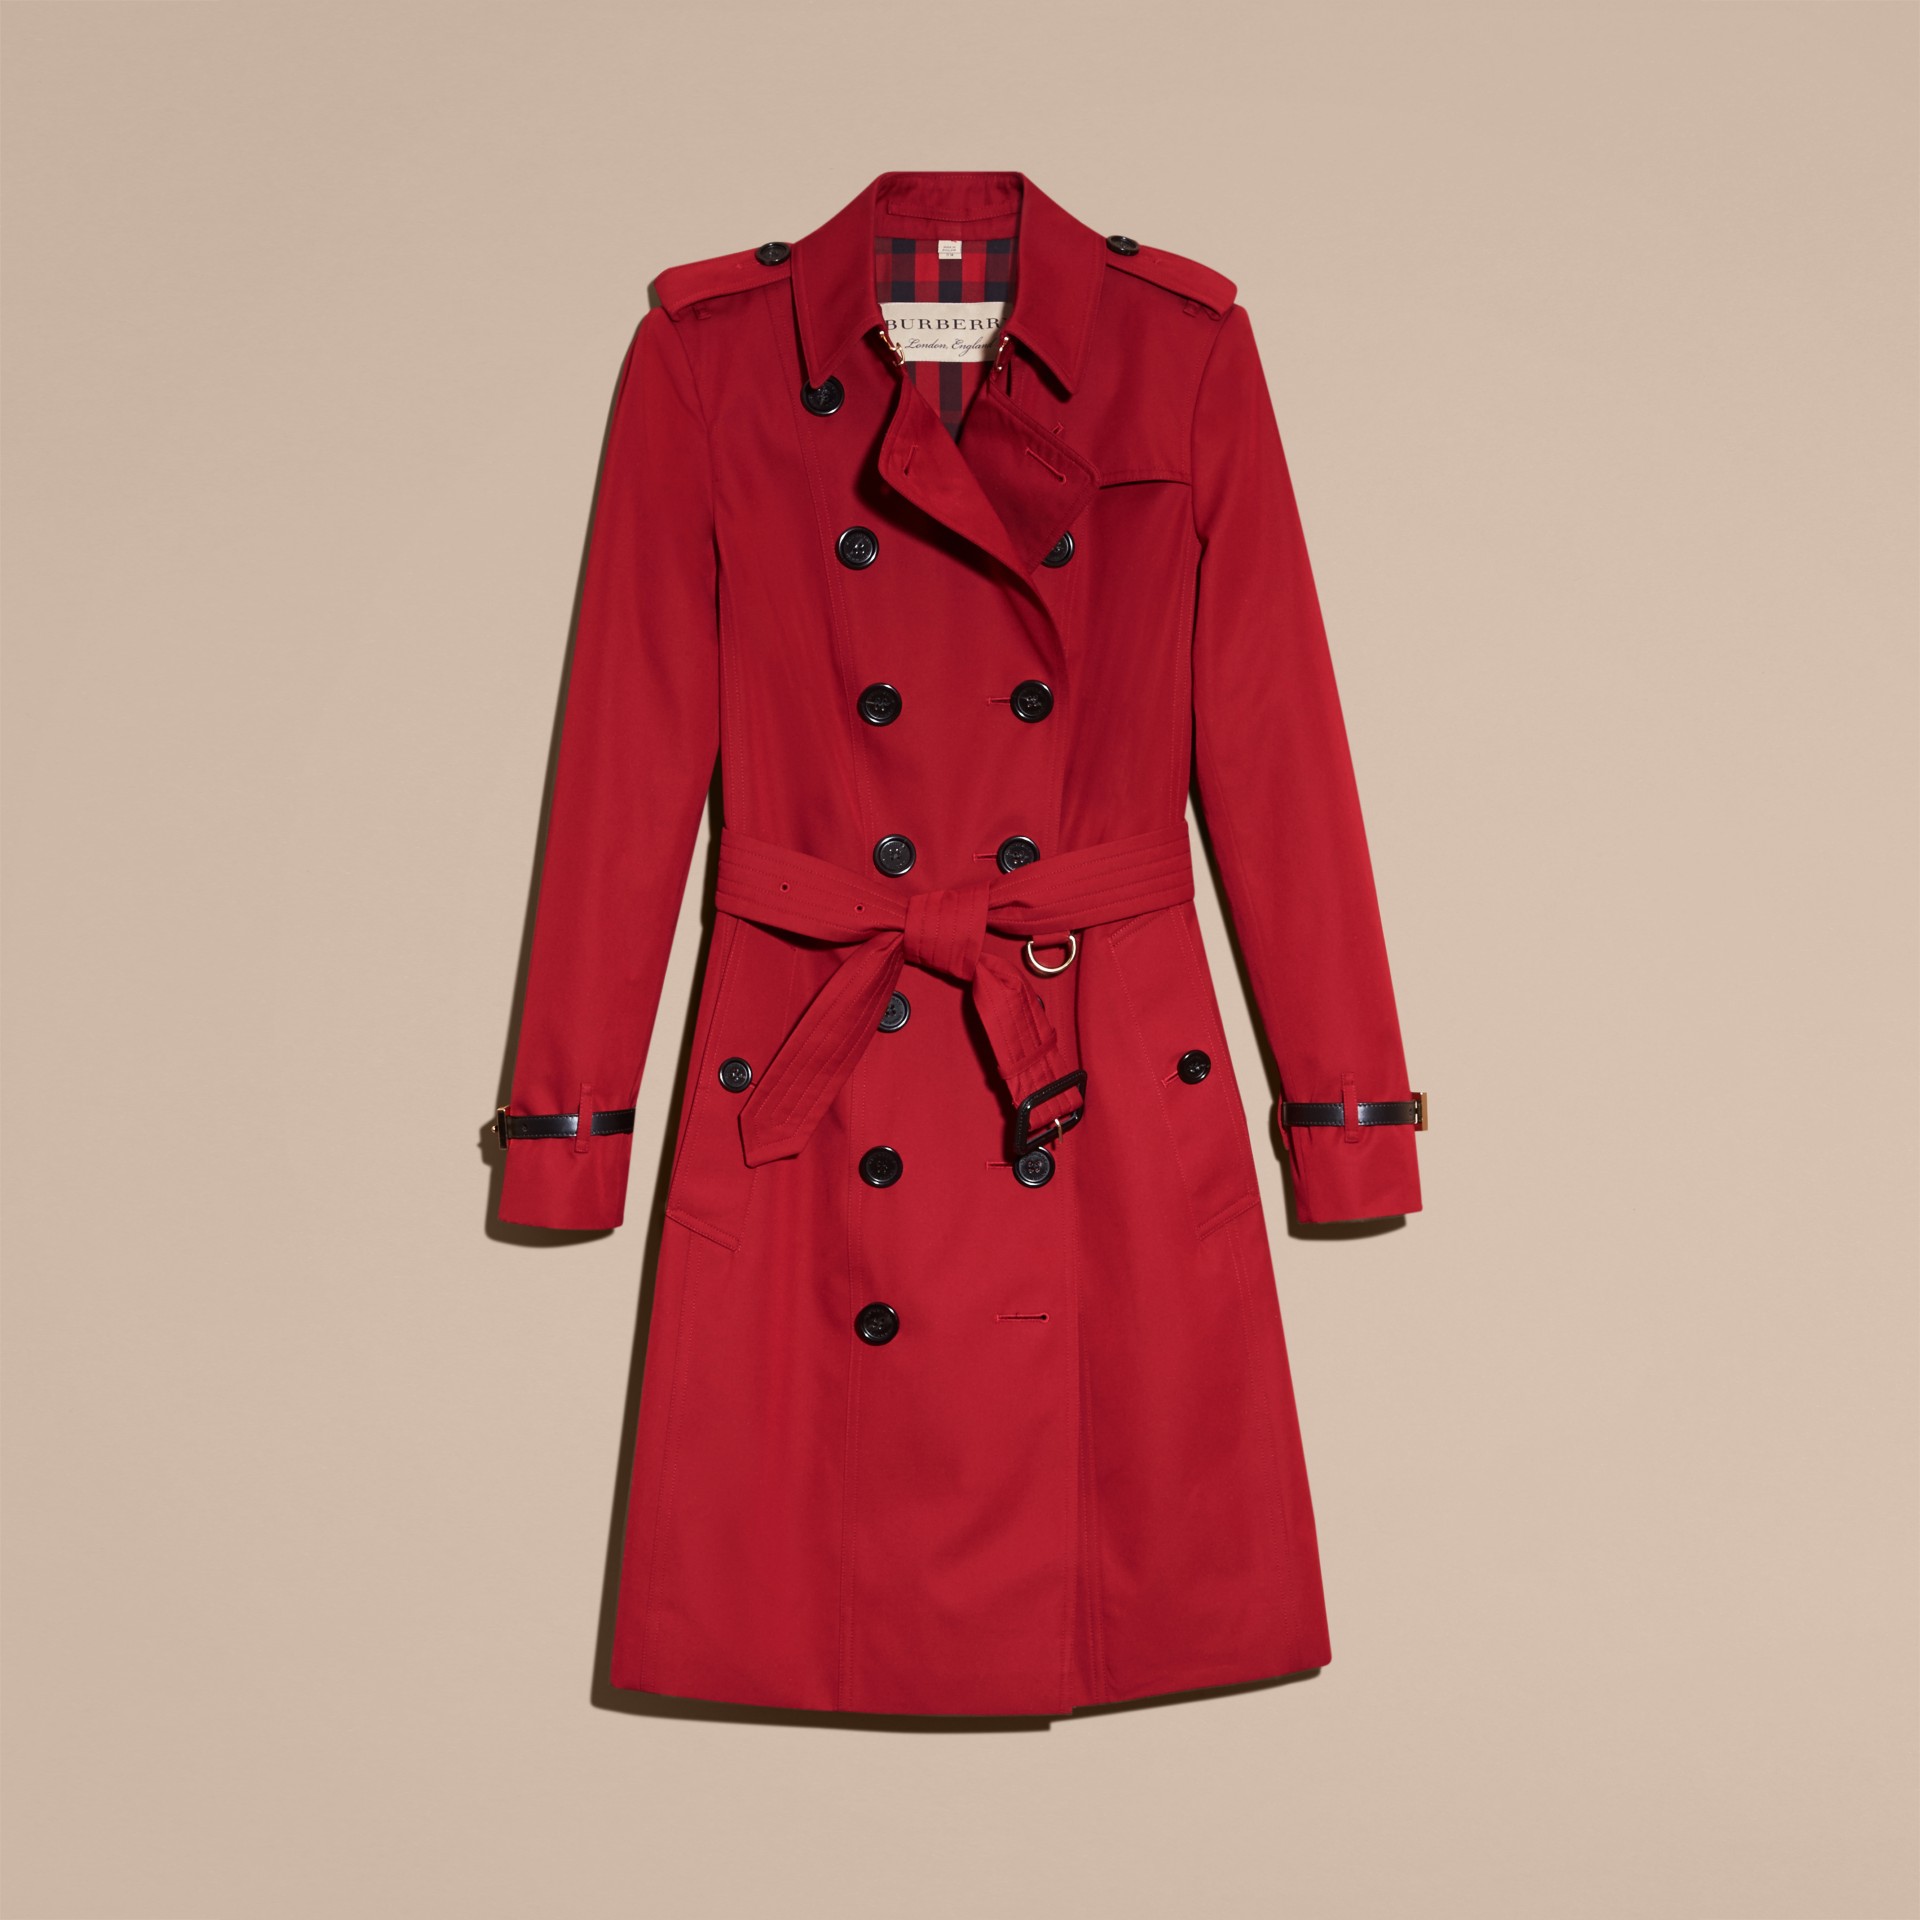 Leather Trim Cotton Gabardine Trench Coat in Parade Red - Women | Burberry